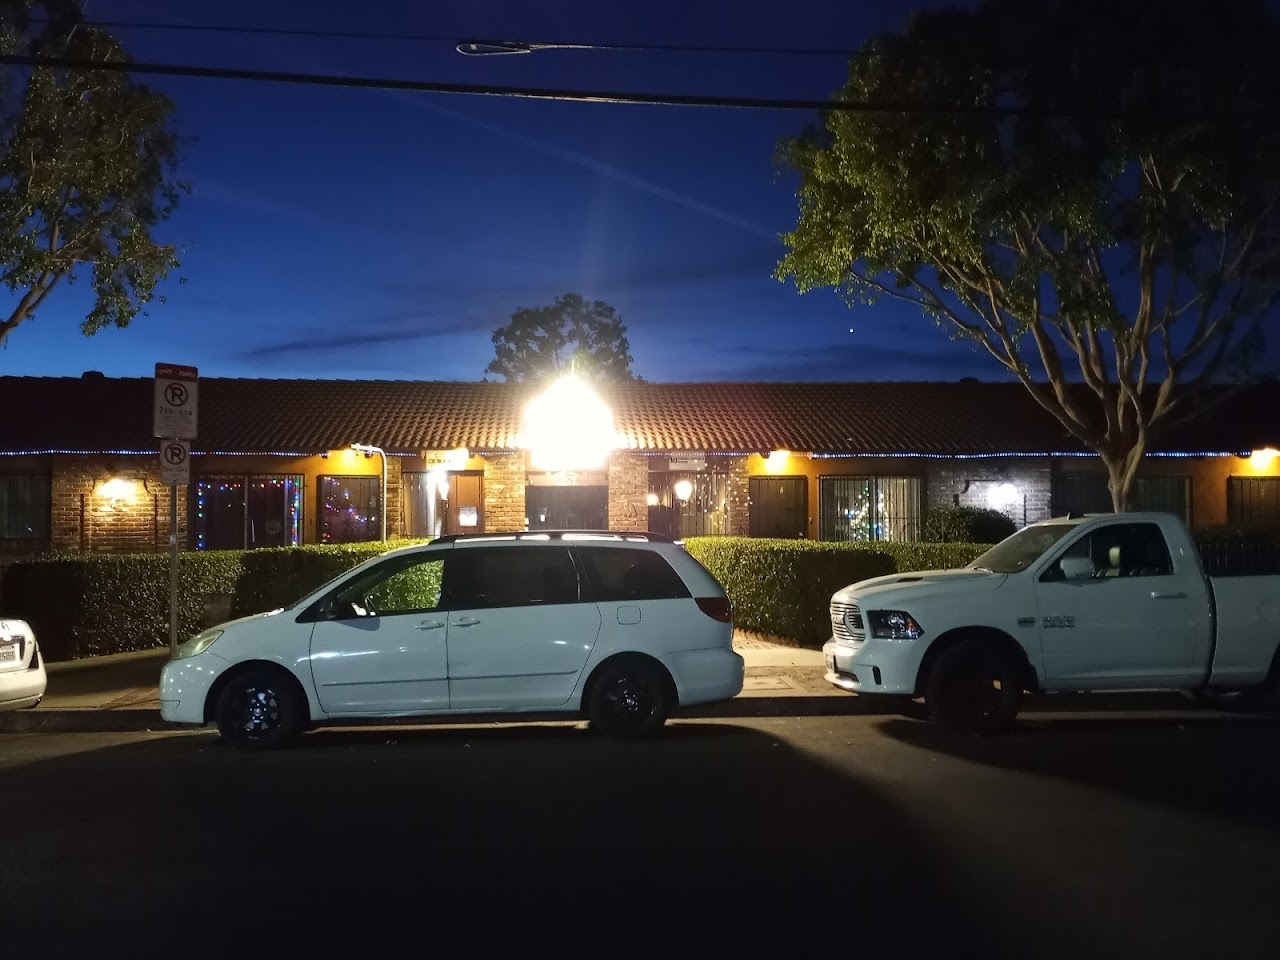 Photo of TOBIAS TERRACE APTS. Affordable housing located at 9247 VAN NUYS BLVD PANORAMA CITY, CA 91402